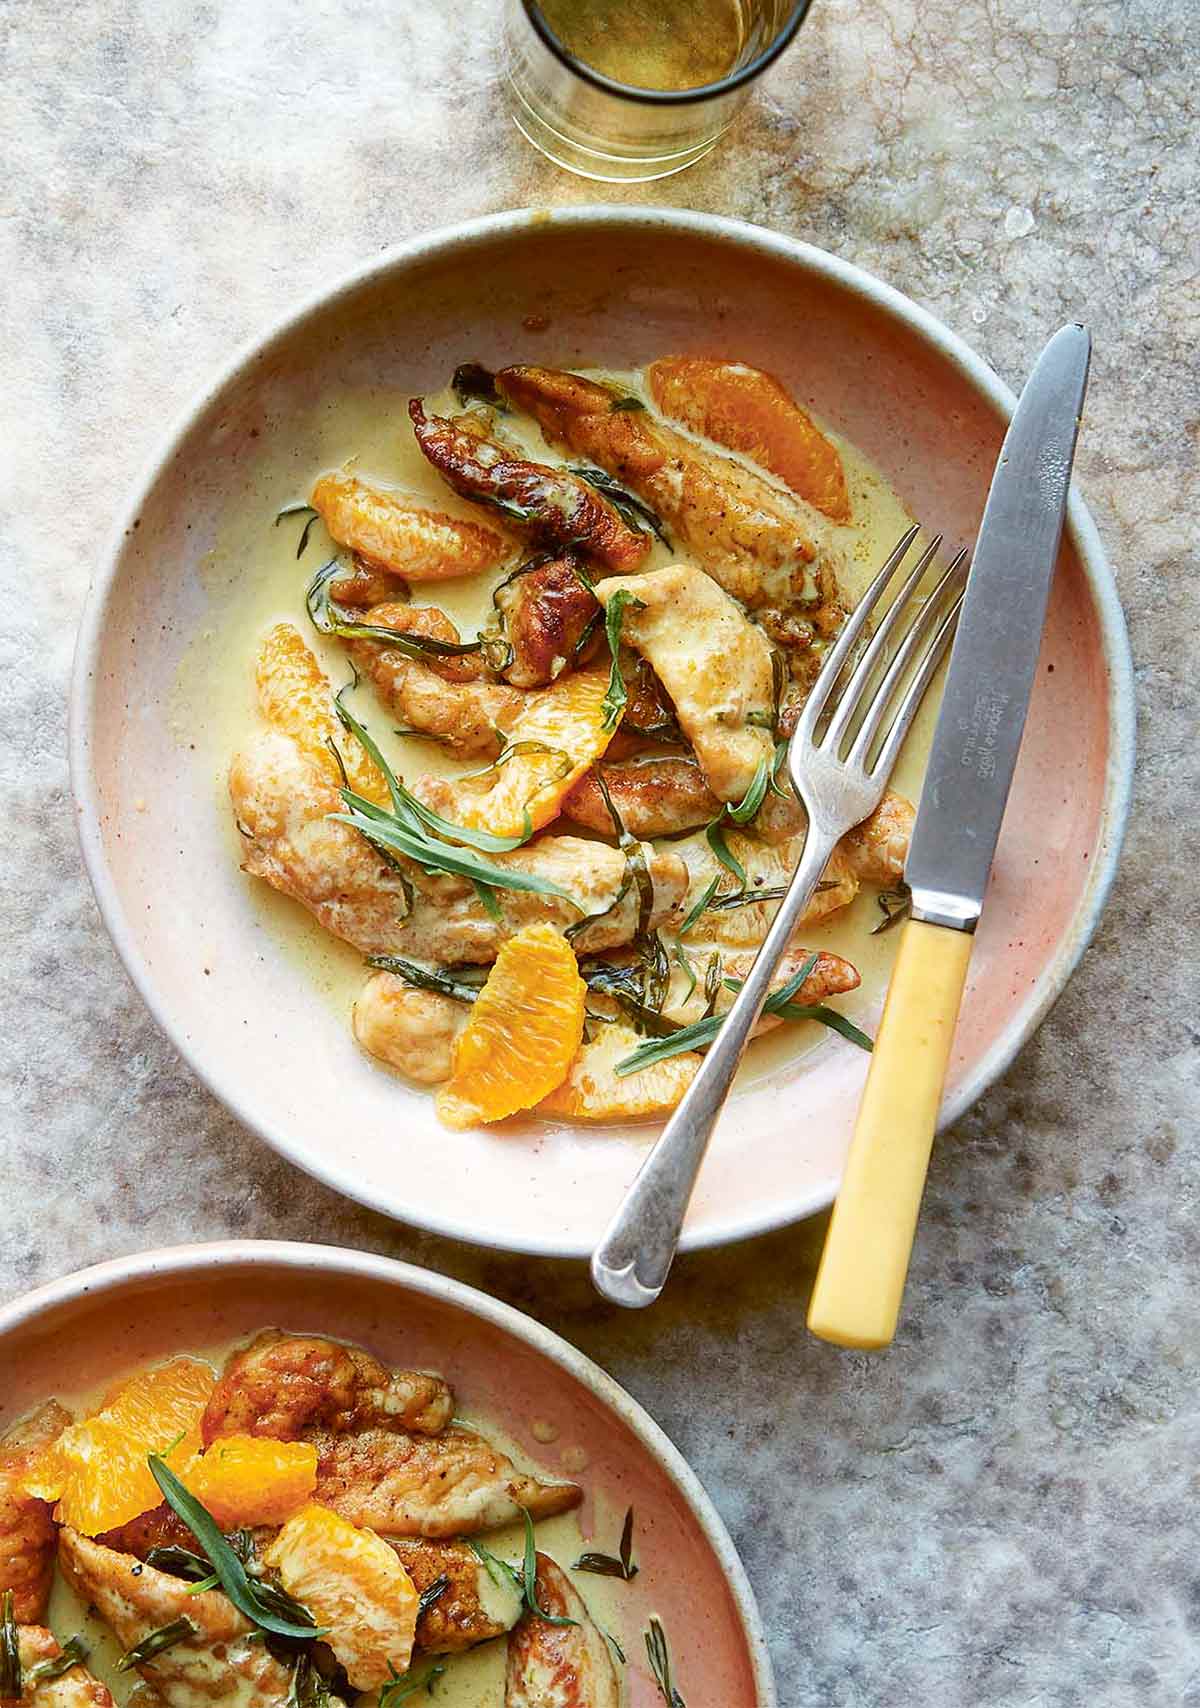 2 bowls of chicken tenders in a cream sauce with slices of orange and chiffonaded tarragon leaves, with a knife and fork.